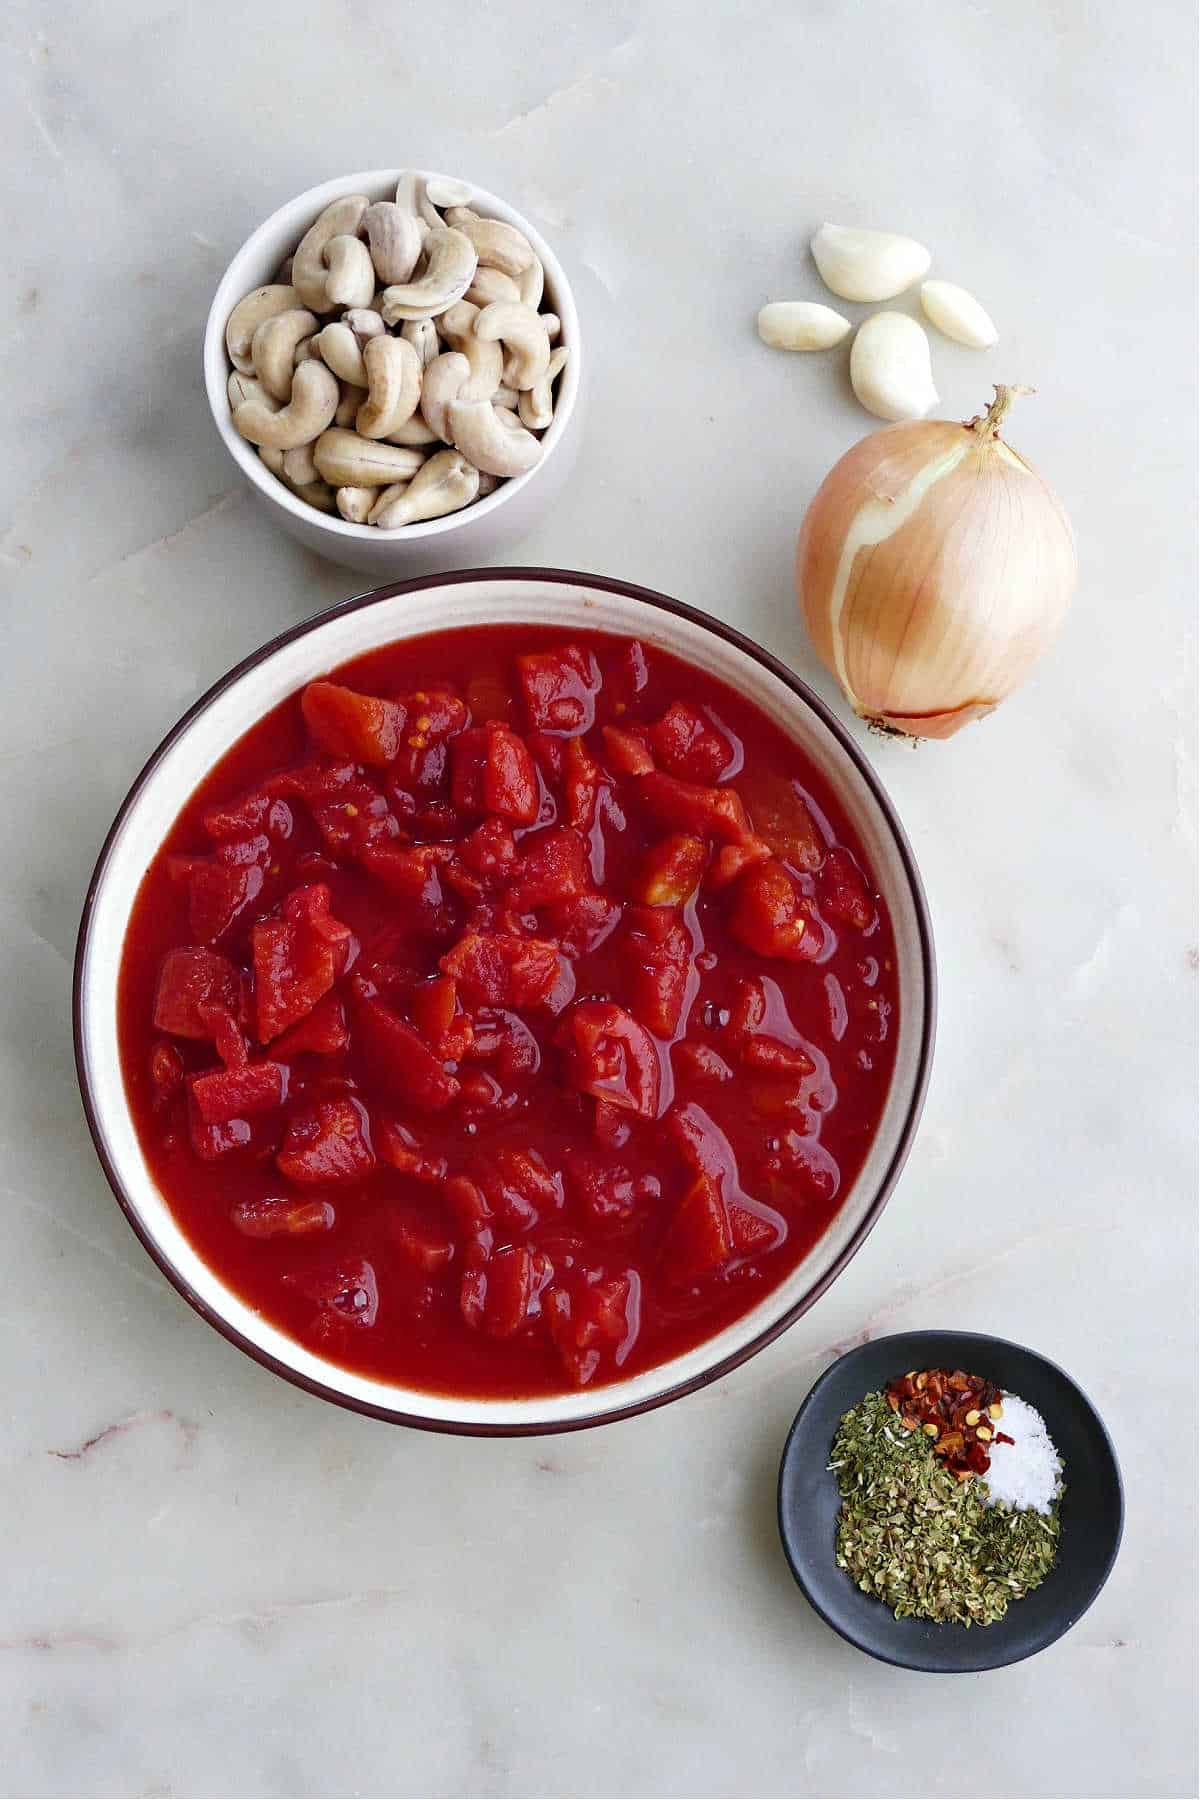 canned tomatoes, cashews, garlic cloves, onion, and seasonings spread out on a counter